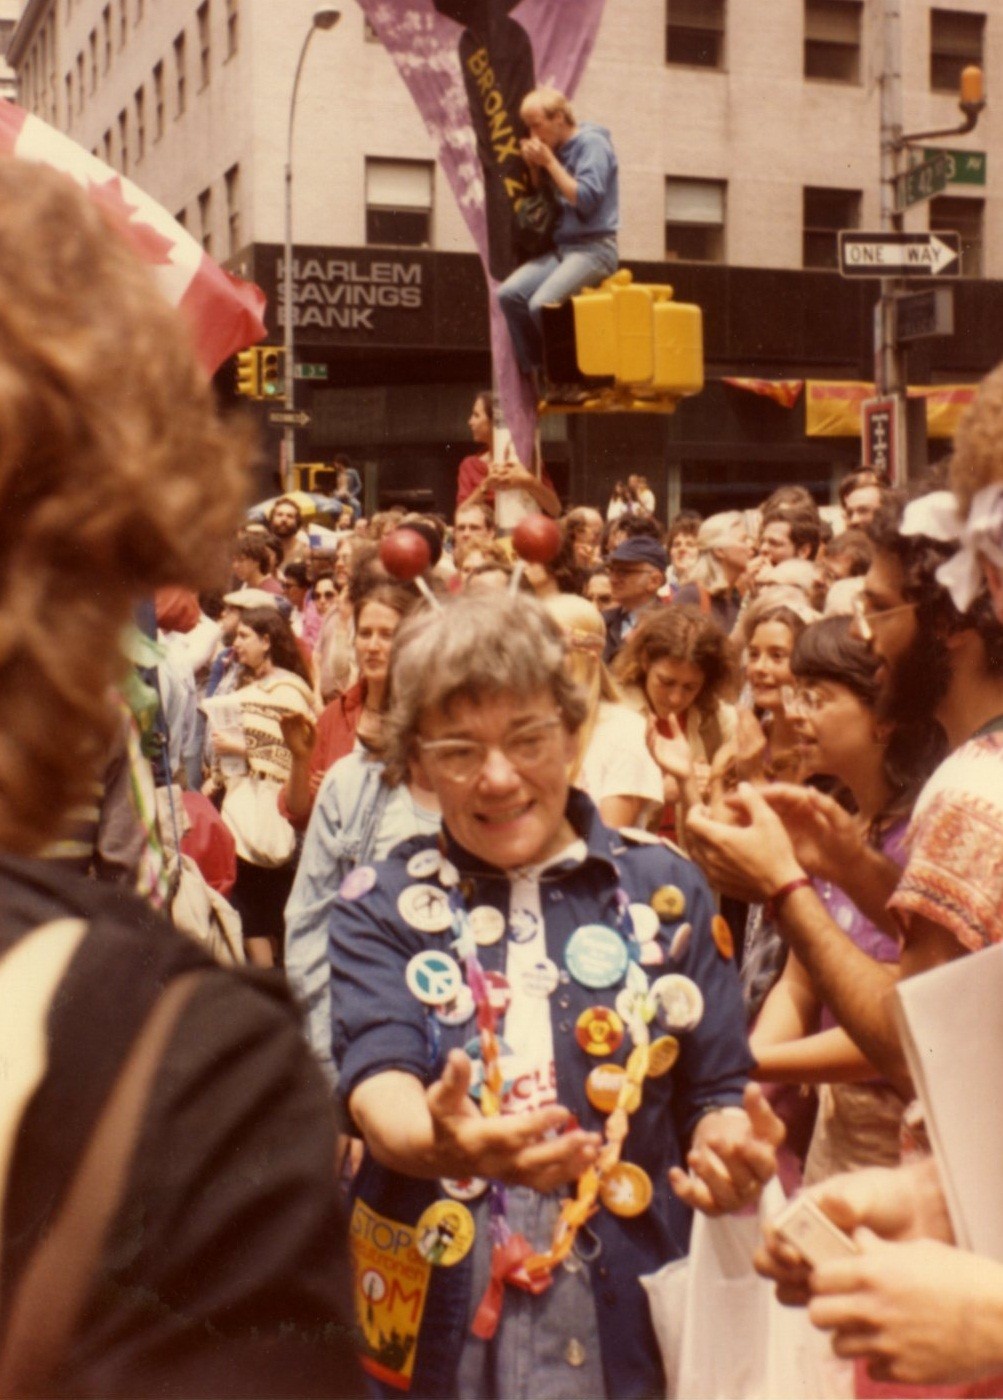 Buttons for peace: A Q&A with Betty Peterson